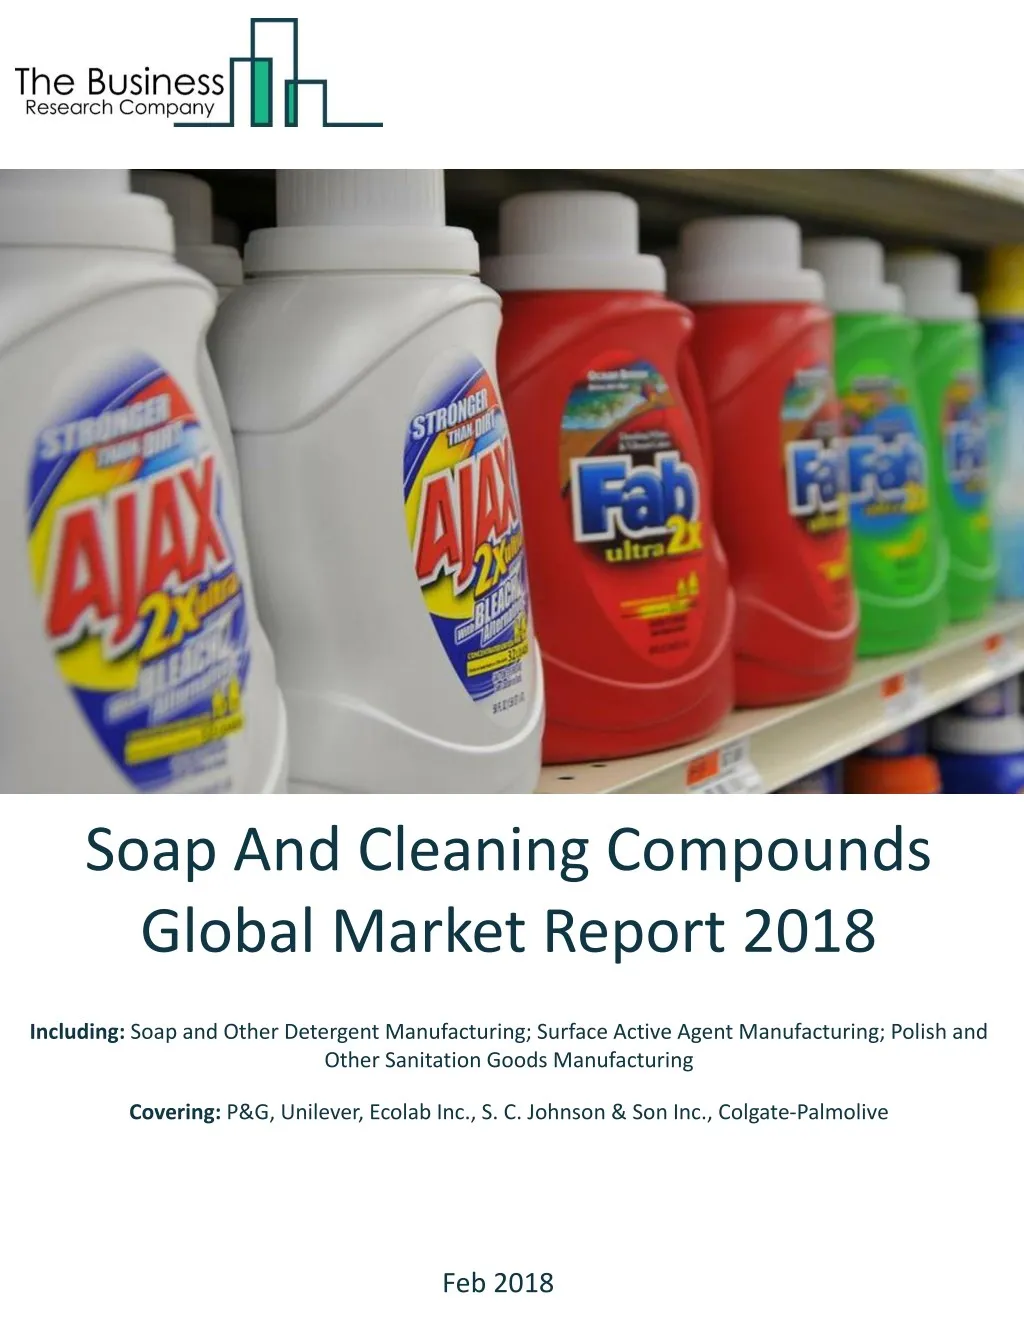 soap and cleaning compounds global market report